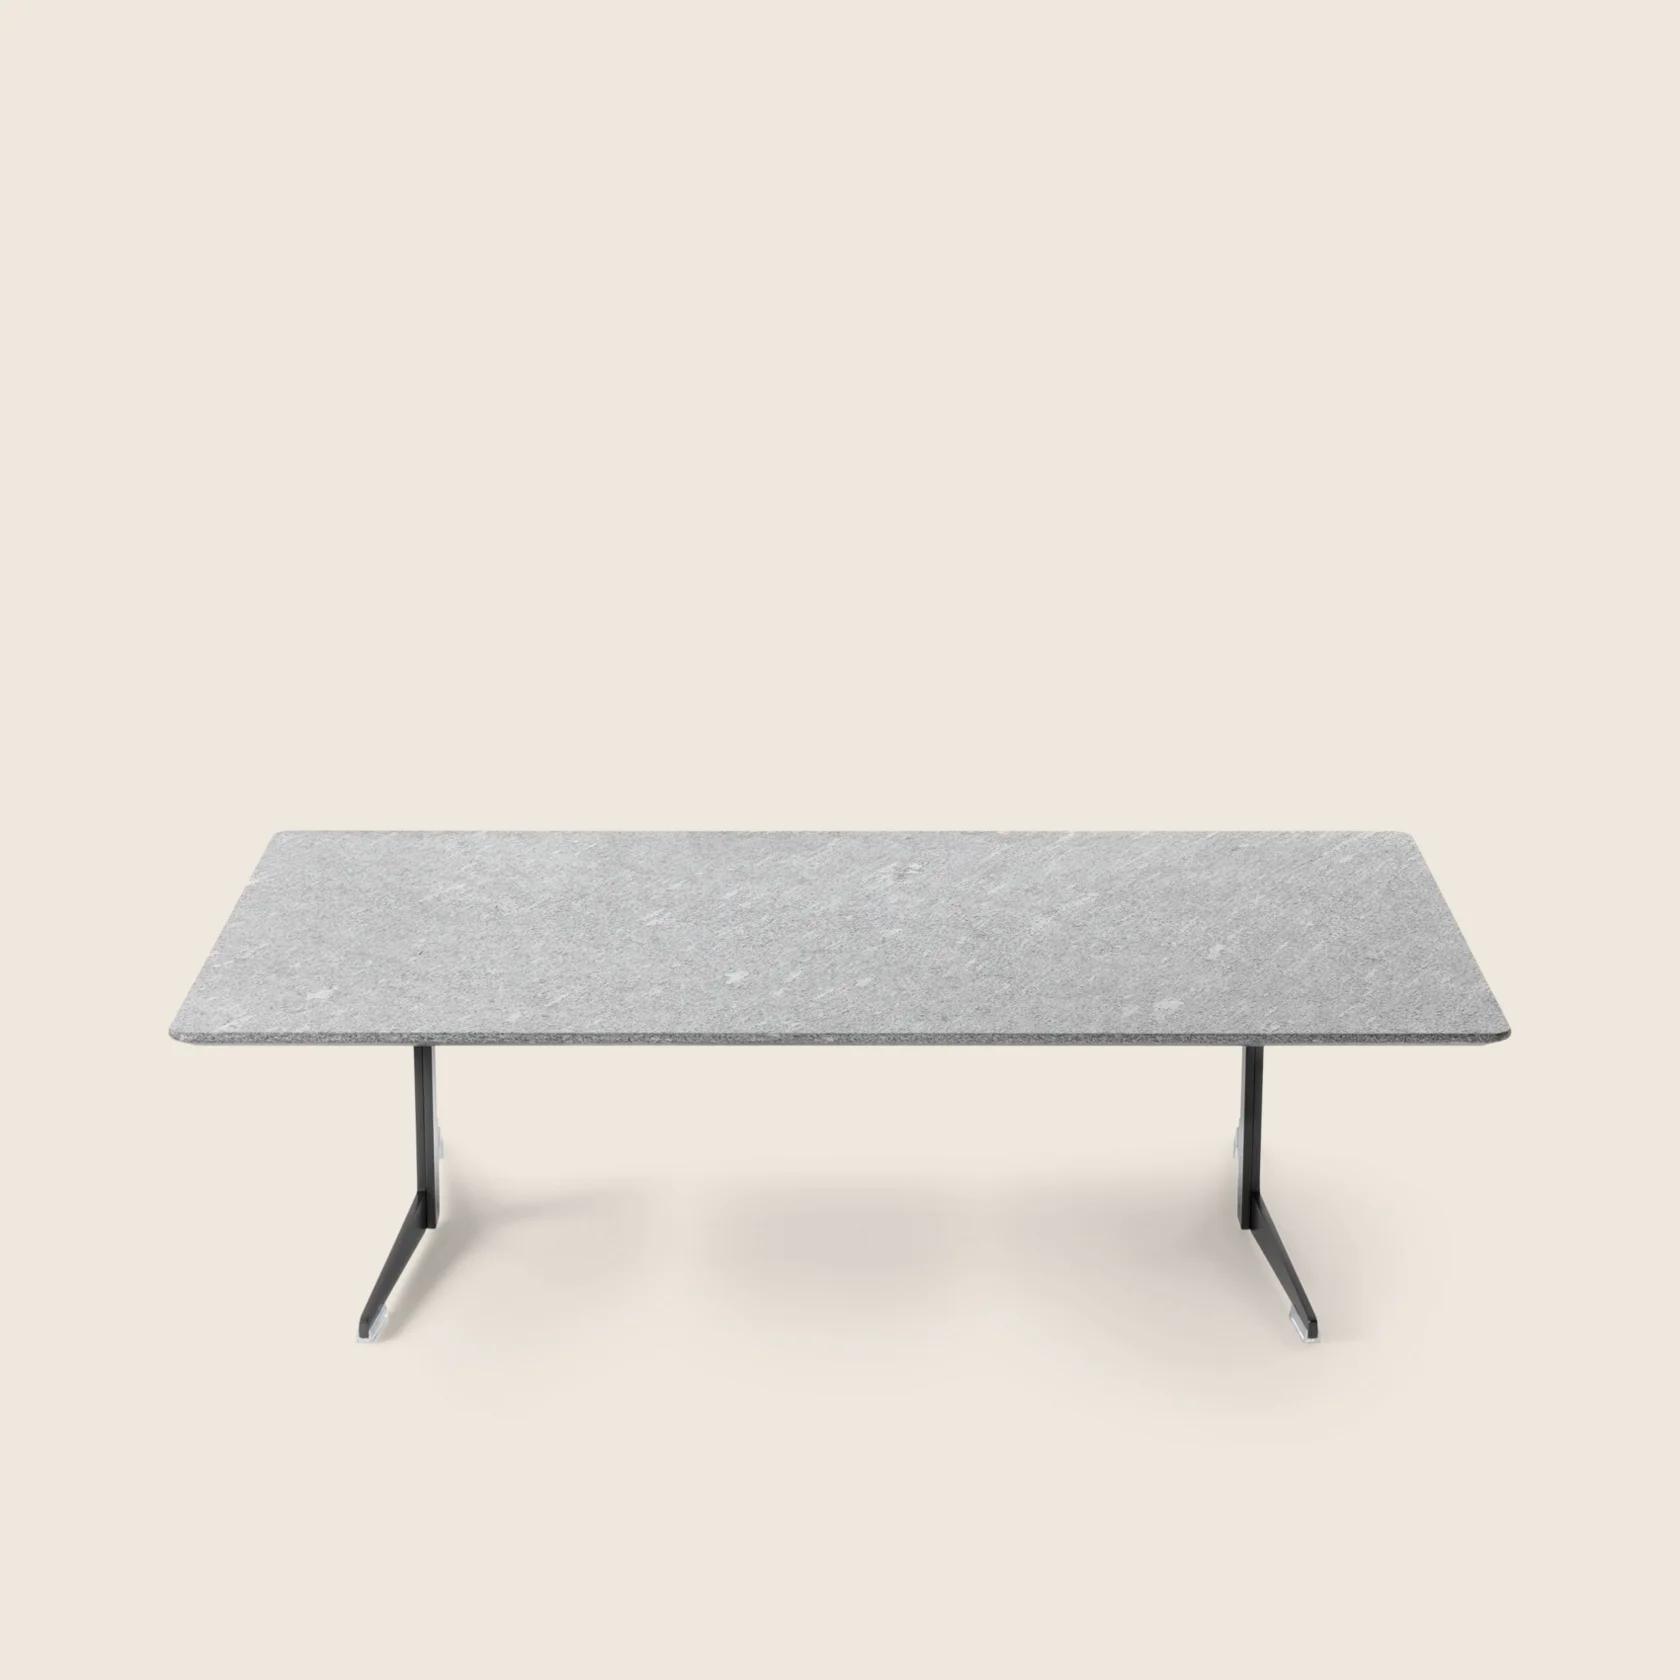 014XH0_FLY OUTDOOR_COFFEETABLE_02.png